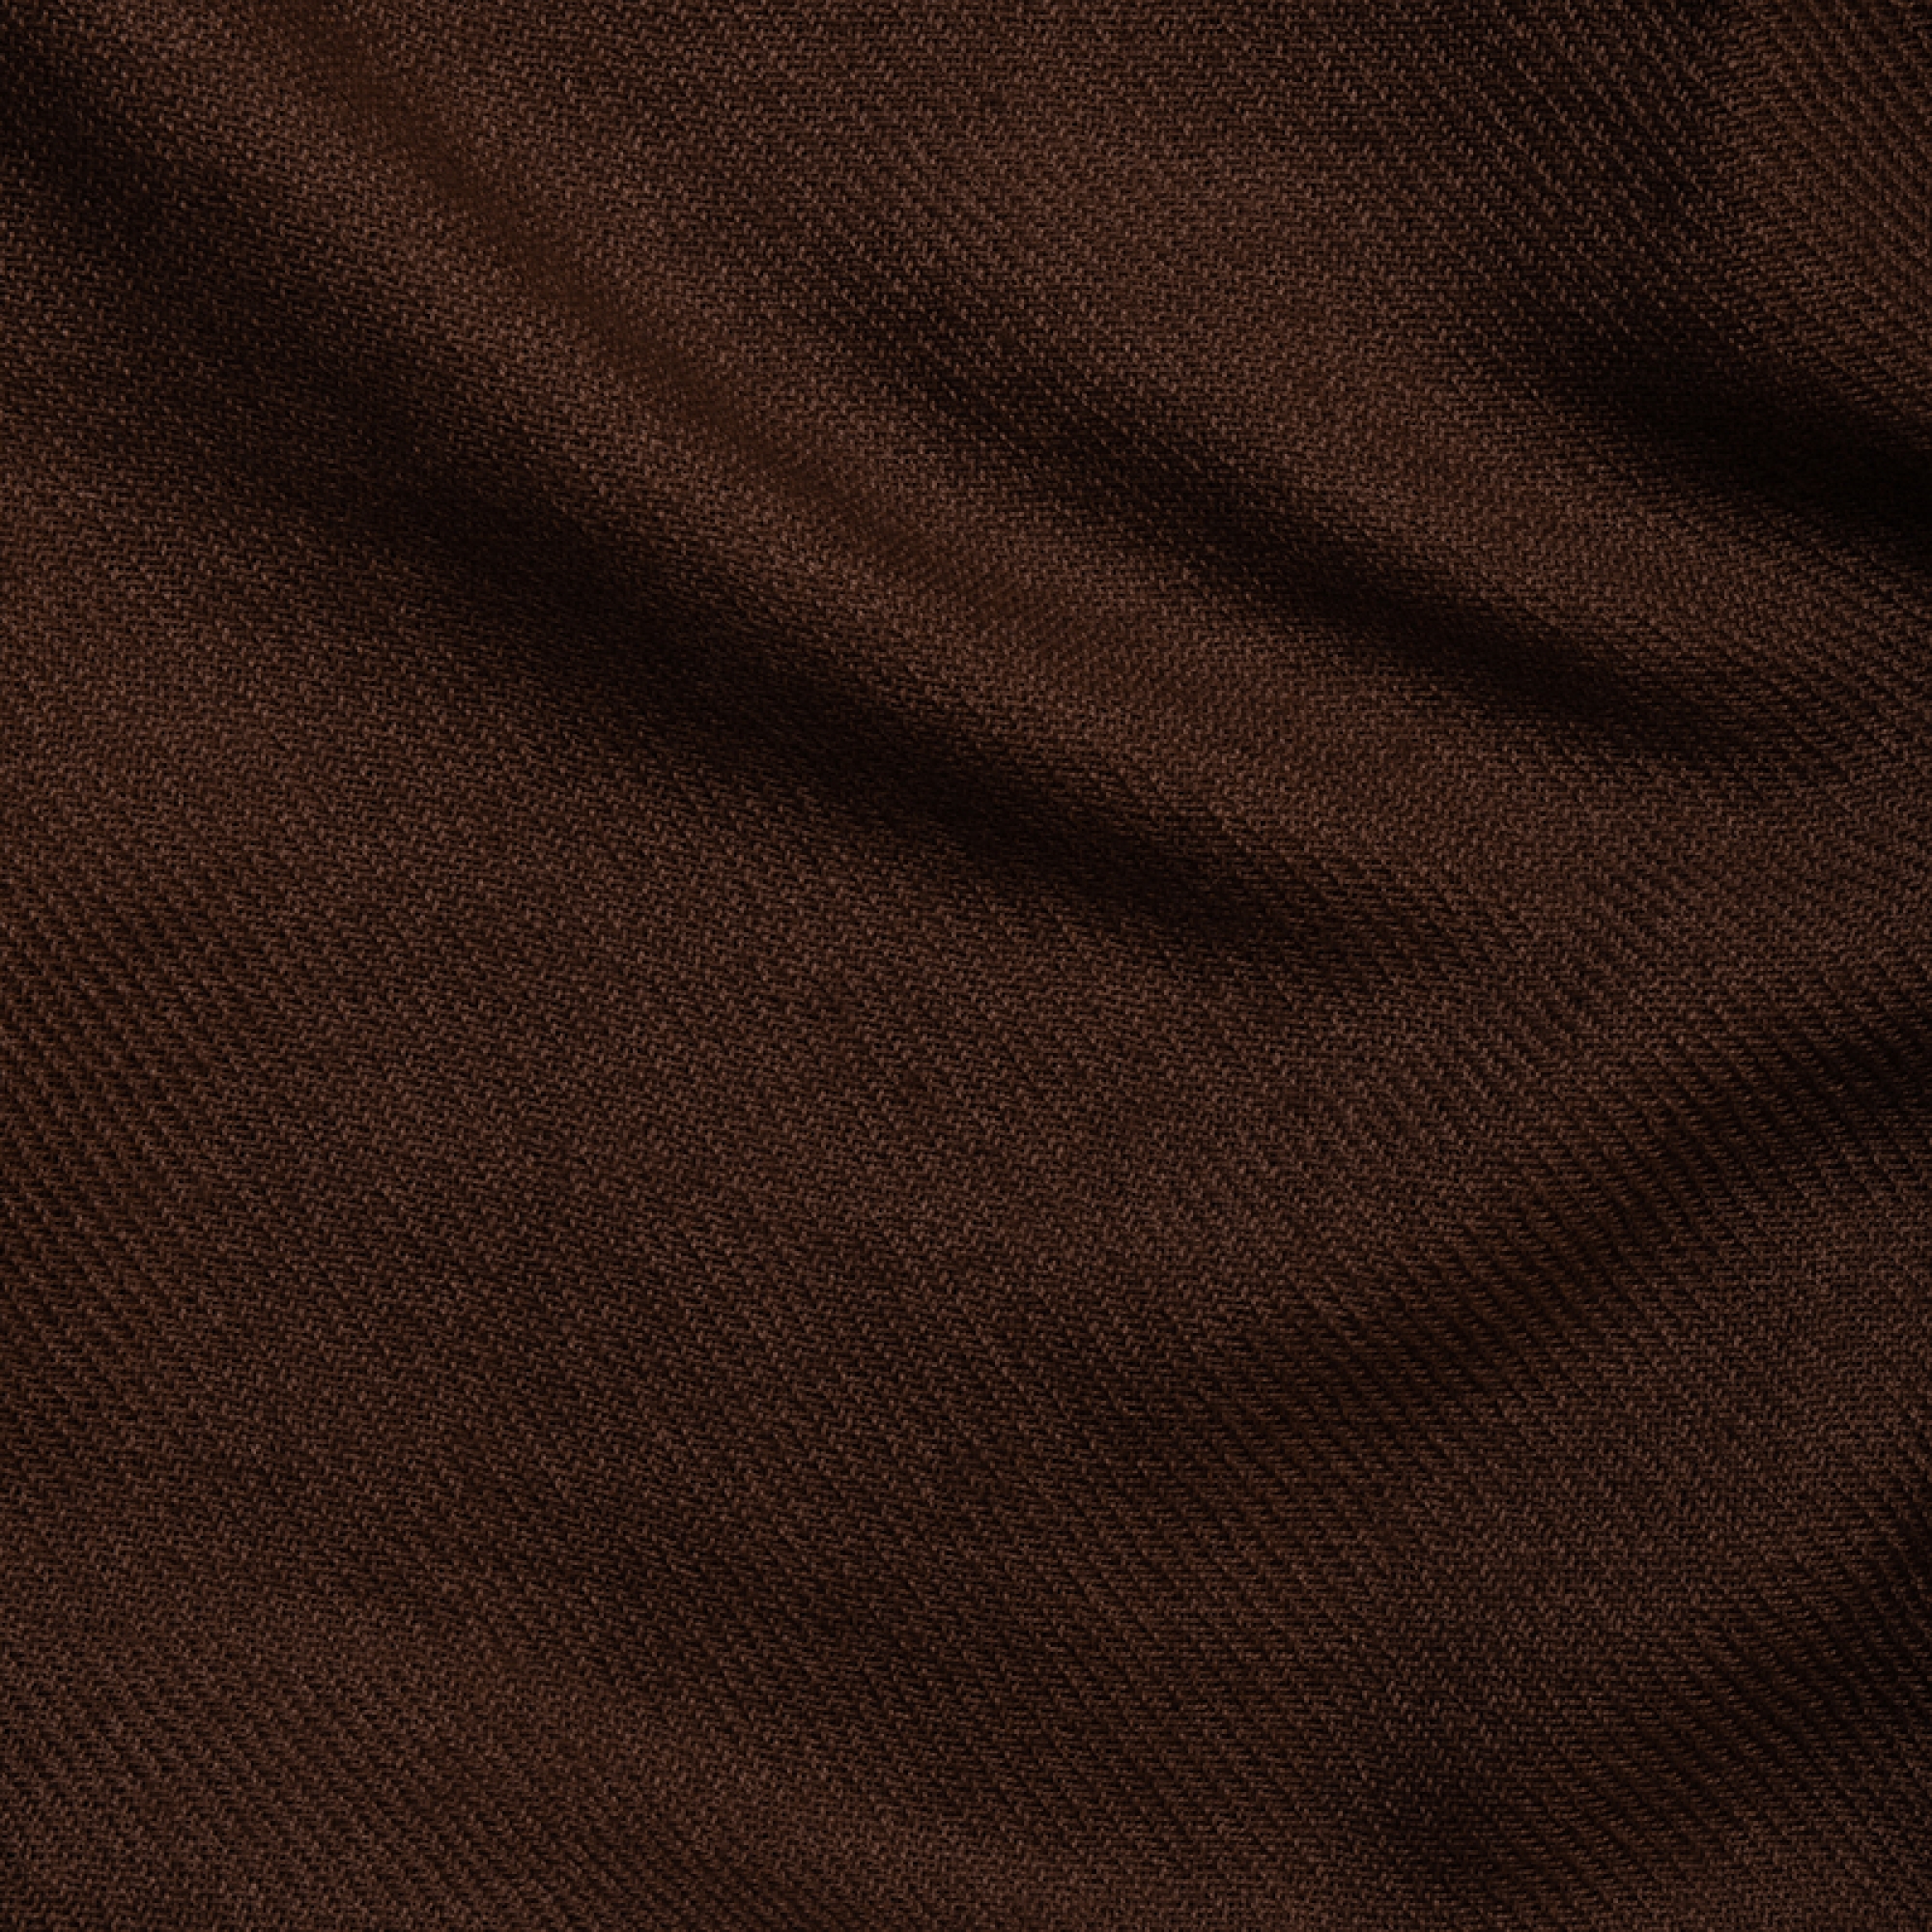 Cashmere accessories blanket toodoo plain s 140 x 200 cacao 140 x 200 cm